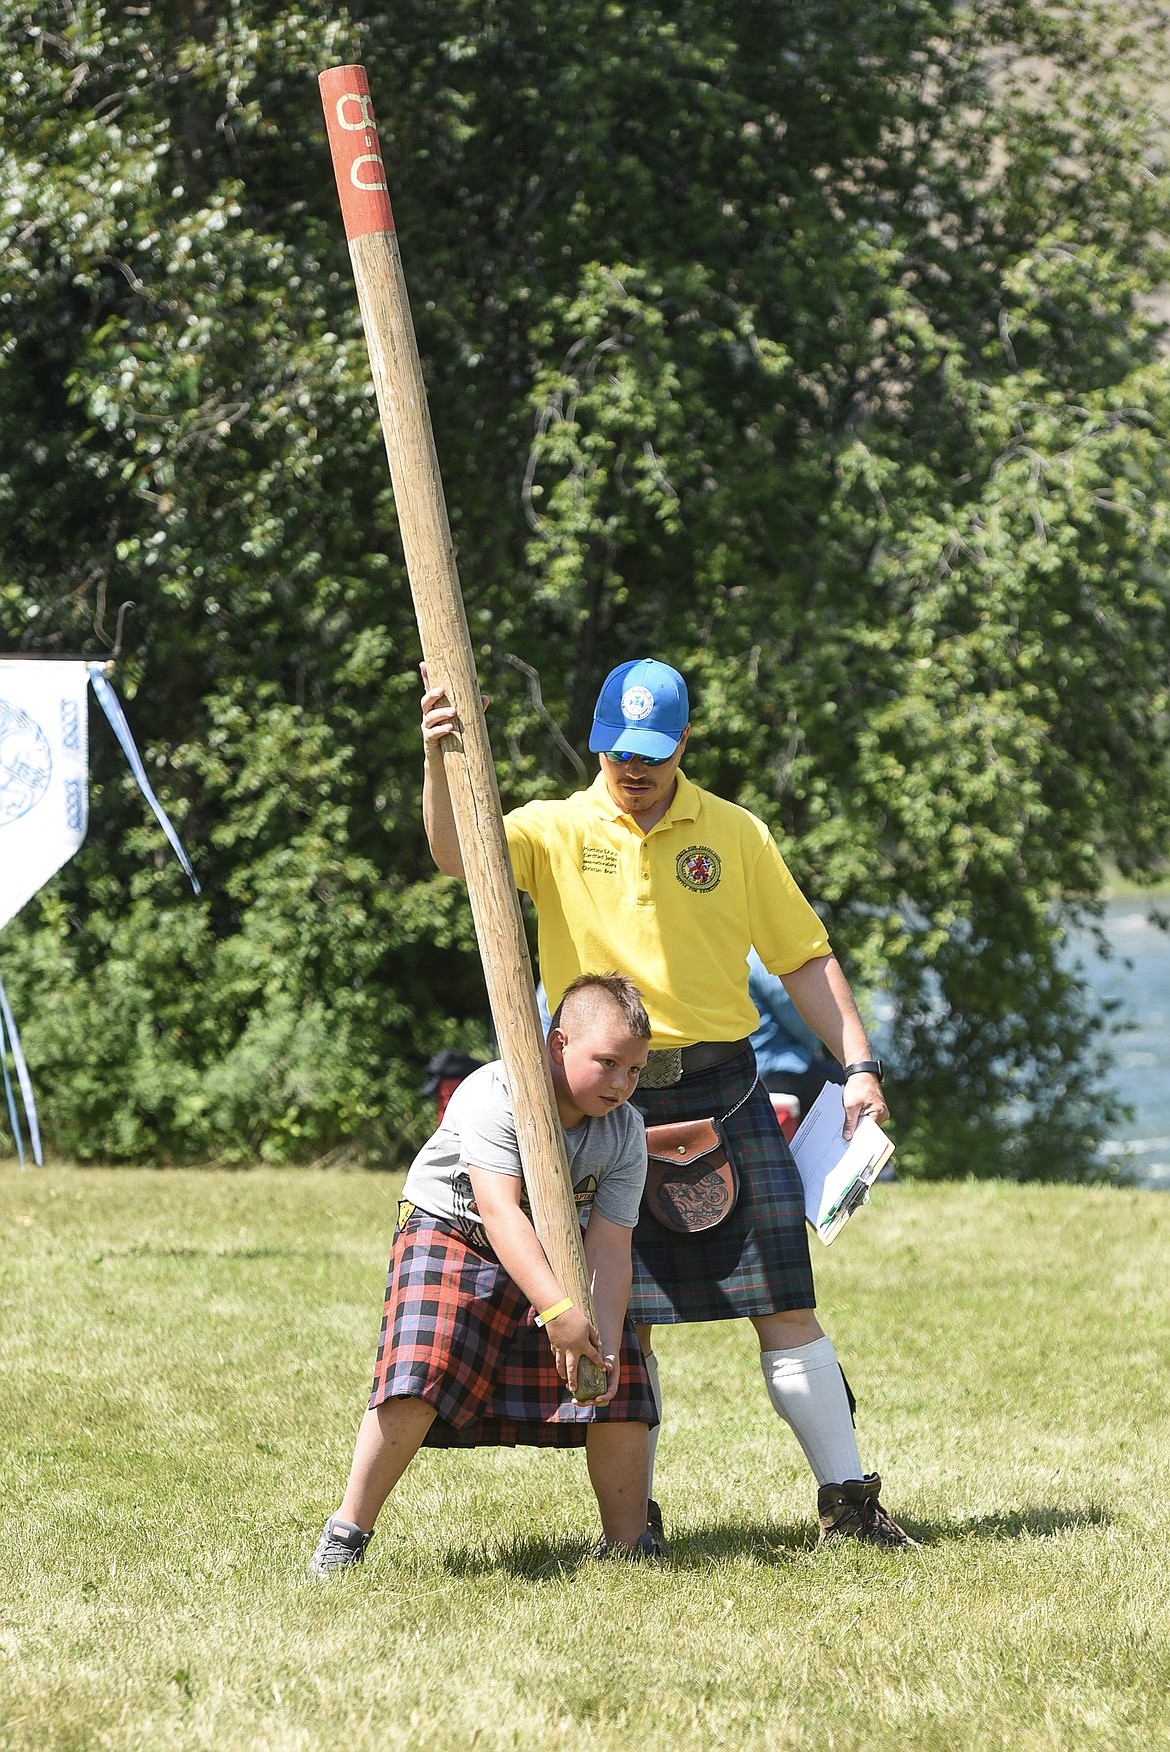 Alex Nelson is assisted by Christian Beach as he prepares to compete in the caber toss, Saturday at the Kootenai Highland Gathering and Celtic Games. (Ben Kibbey/The Western News)